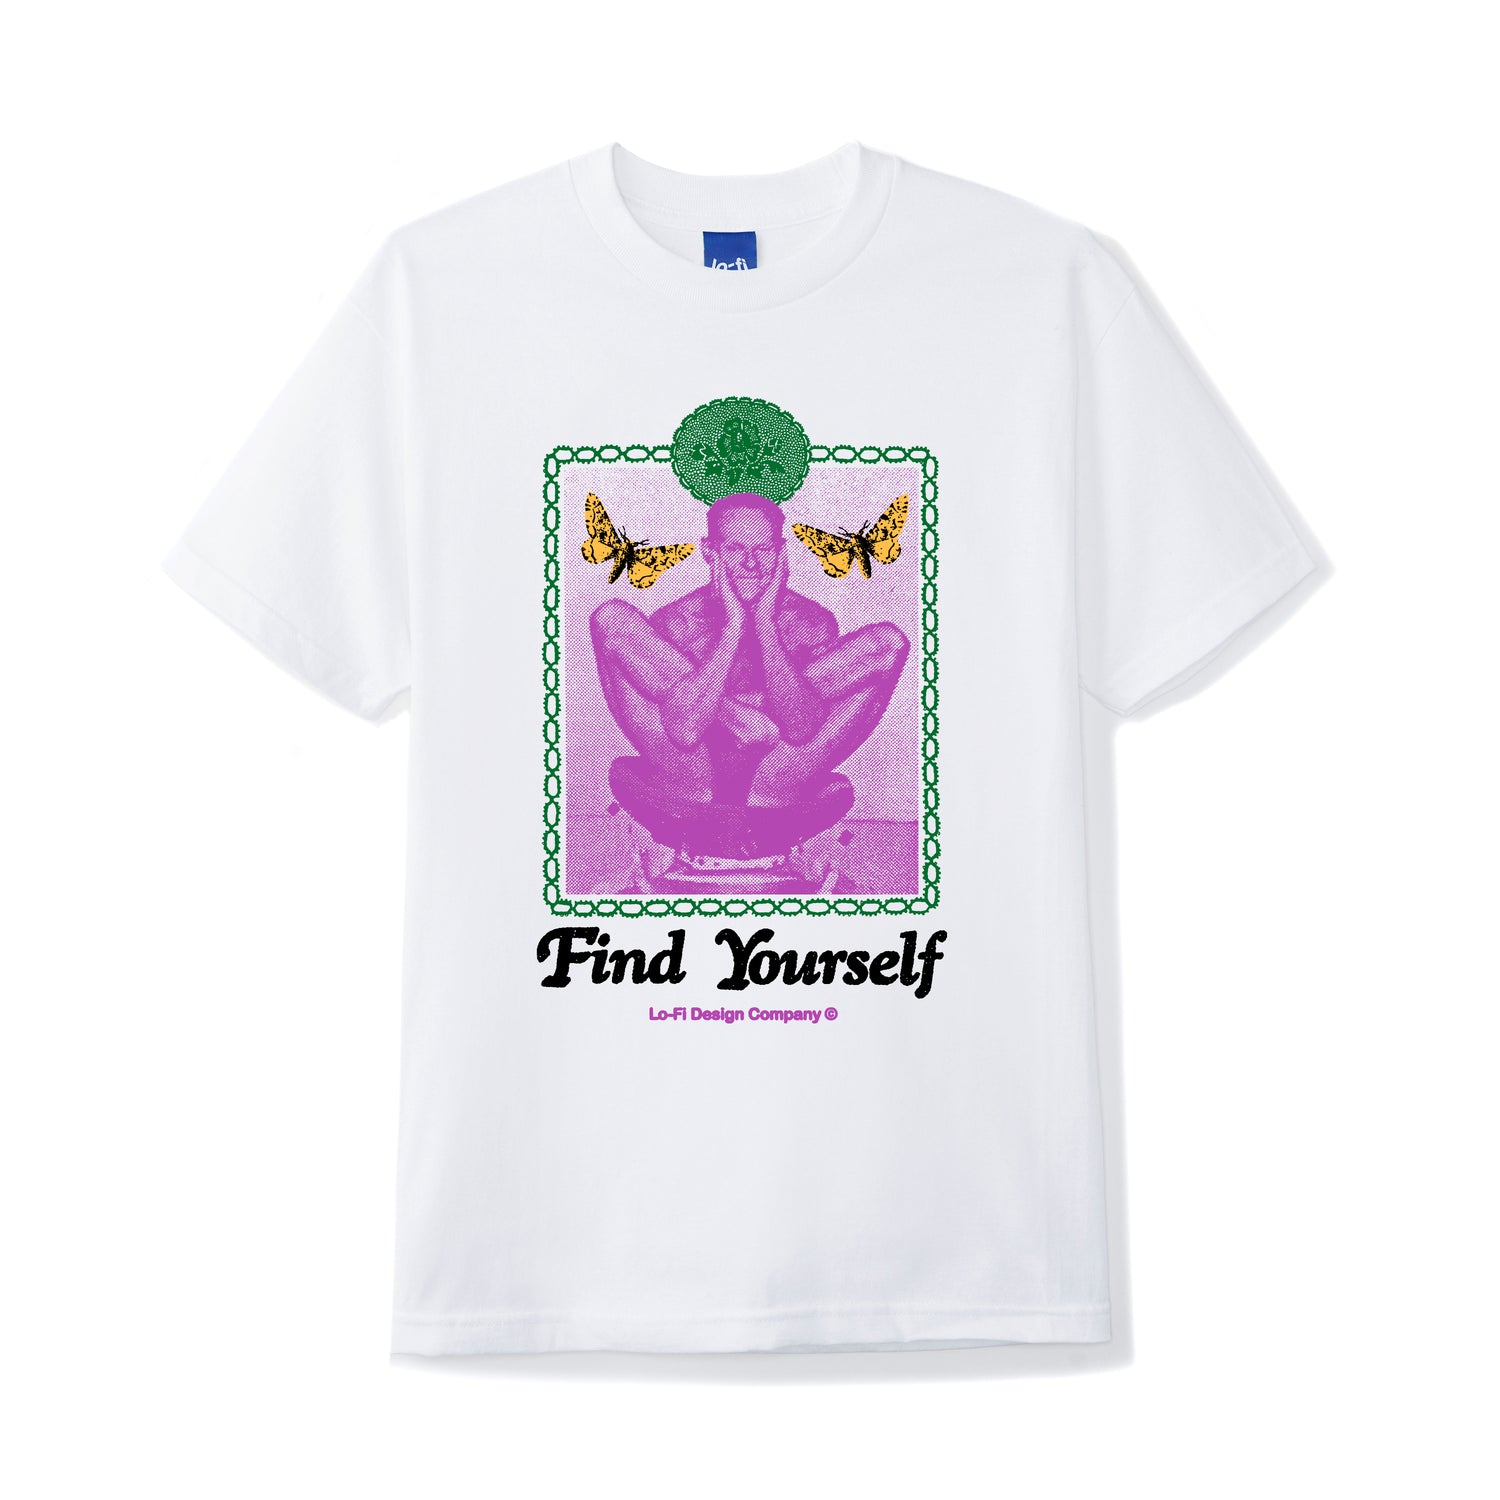 Find Yourself Tee, White